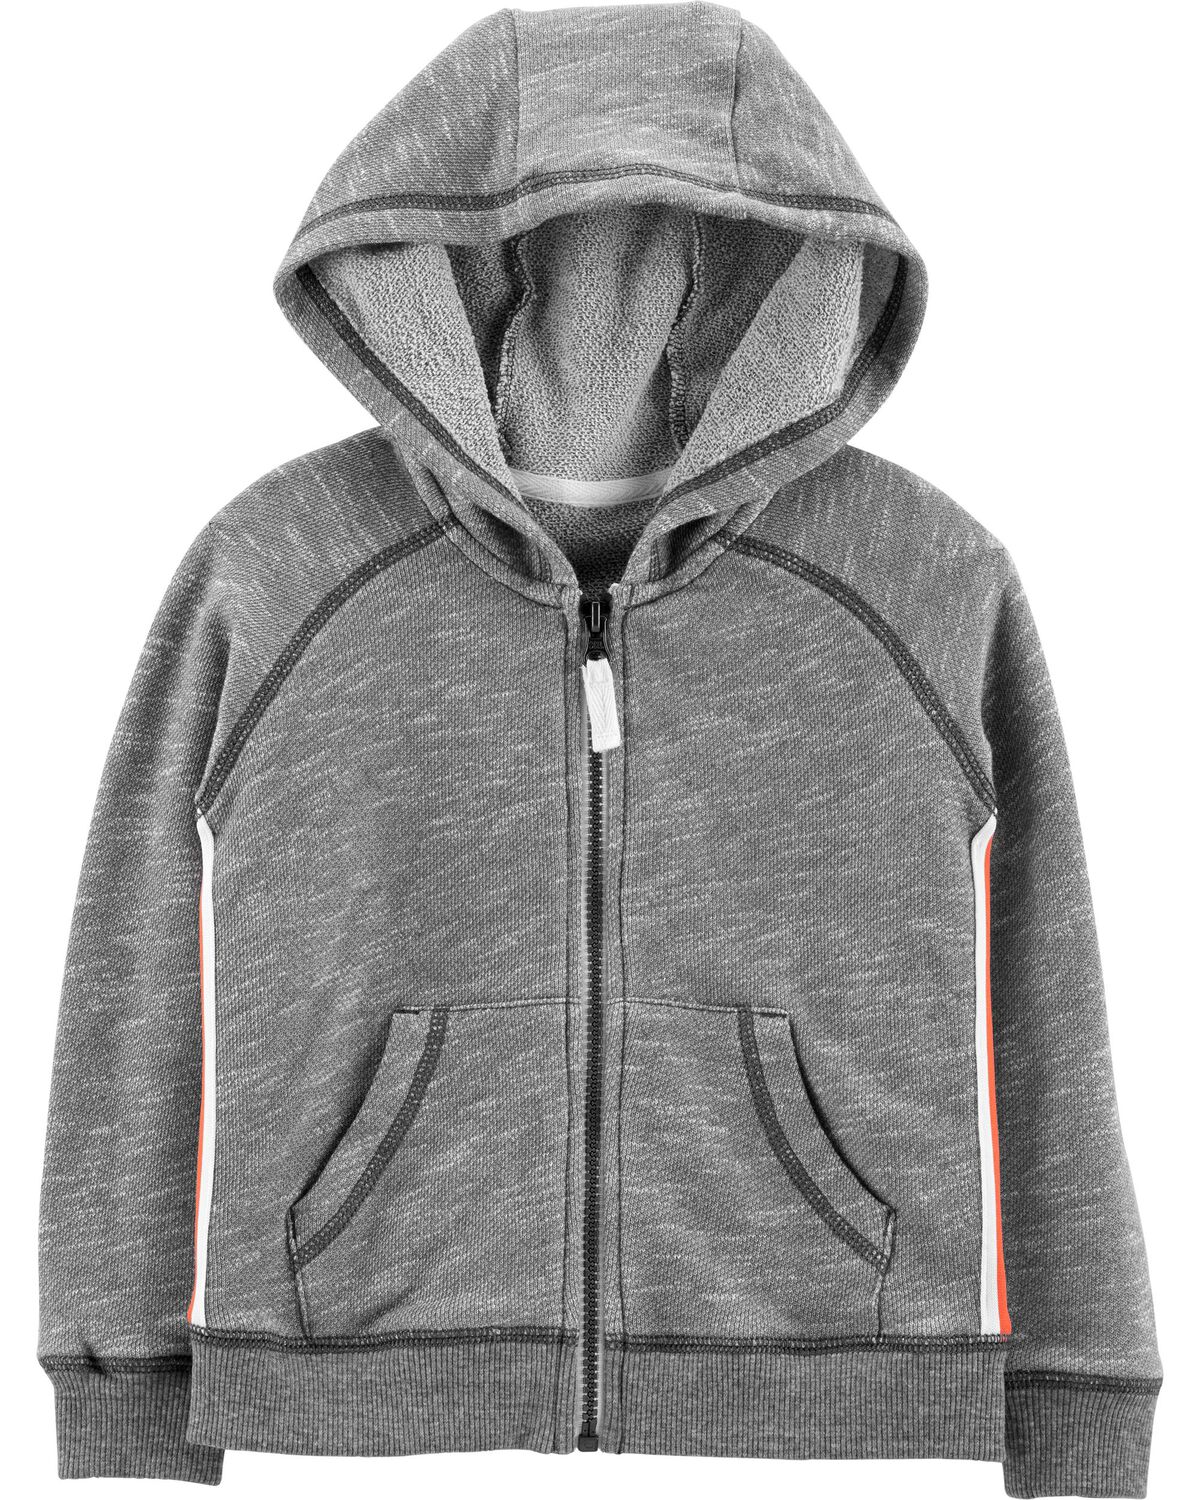 Heather French Terry Hooded Pullover